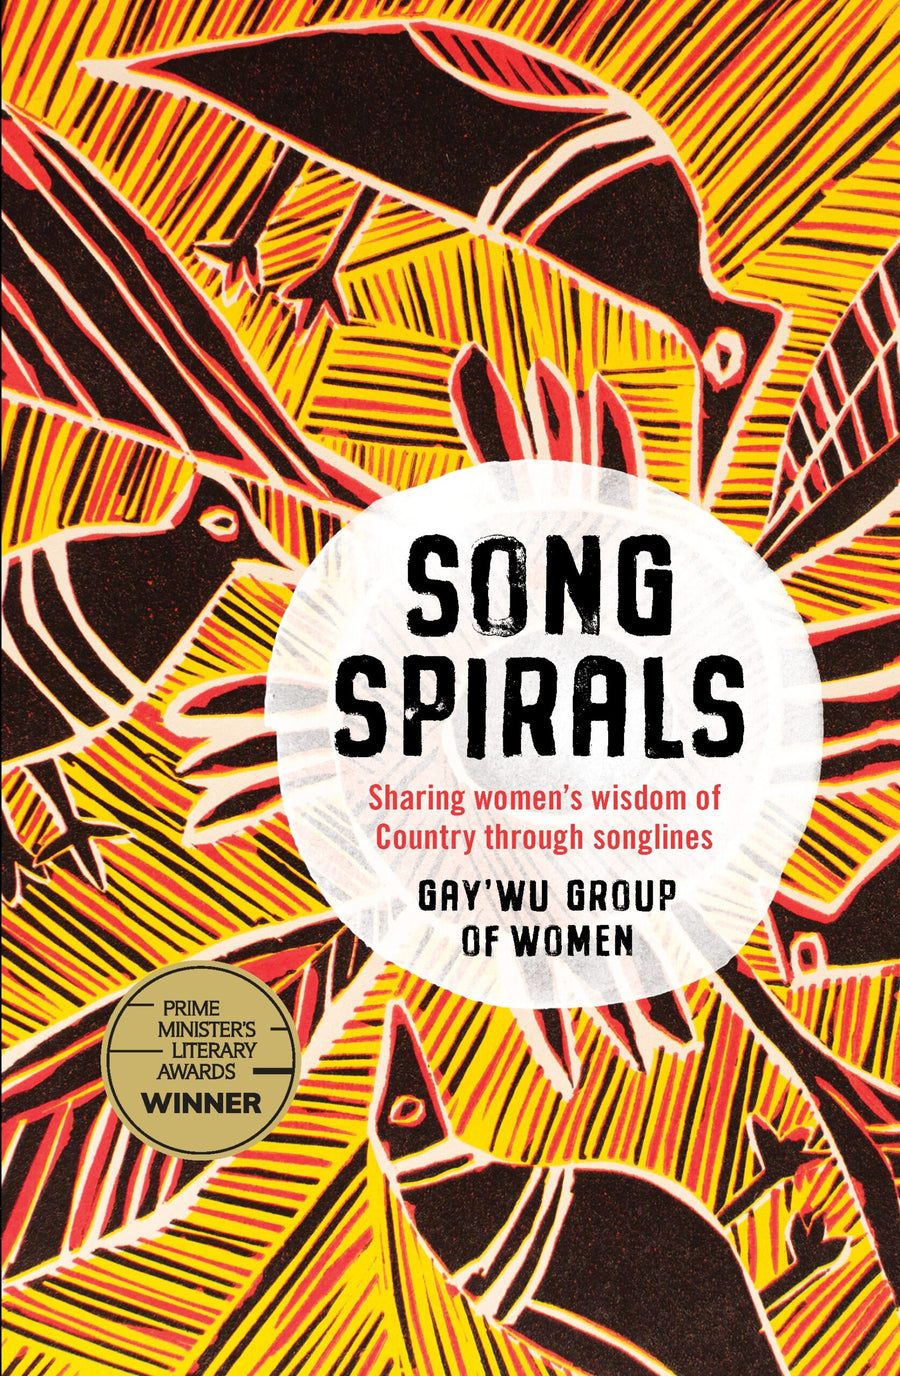 Song Spirals by Gay’wu Group of Women